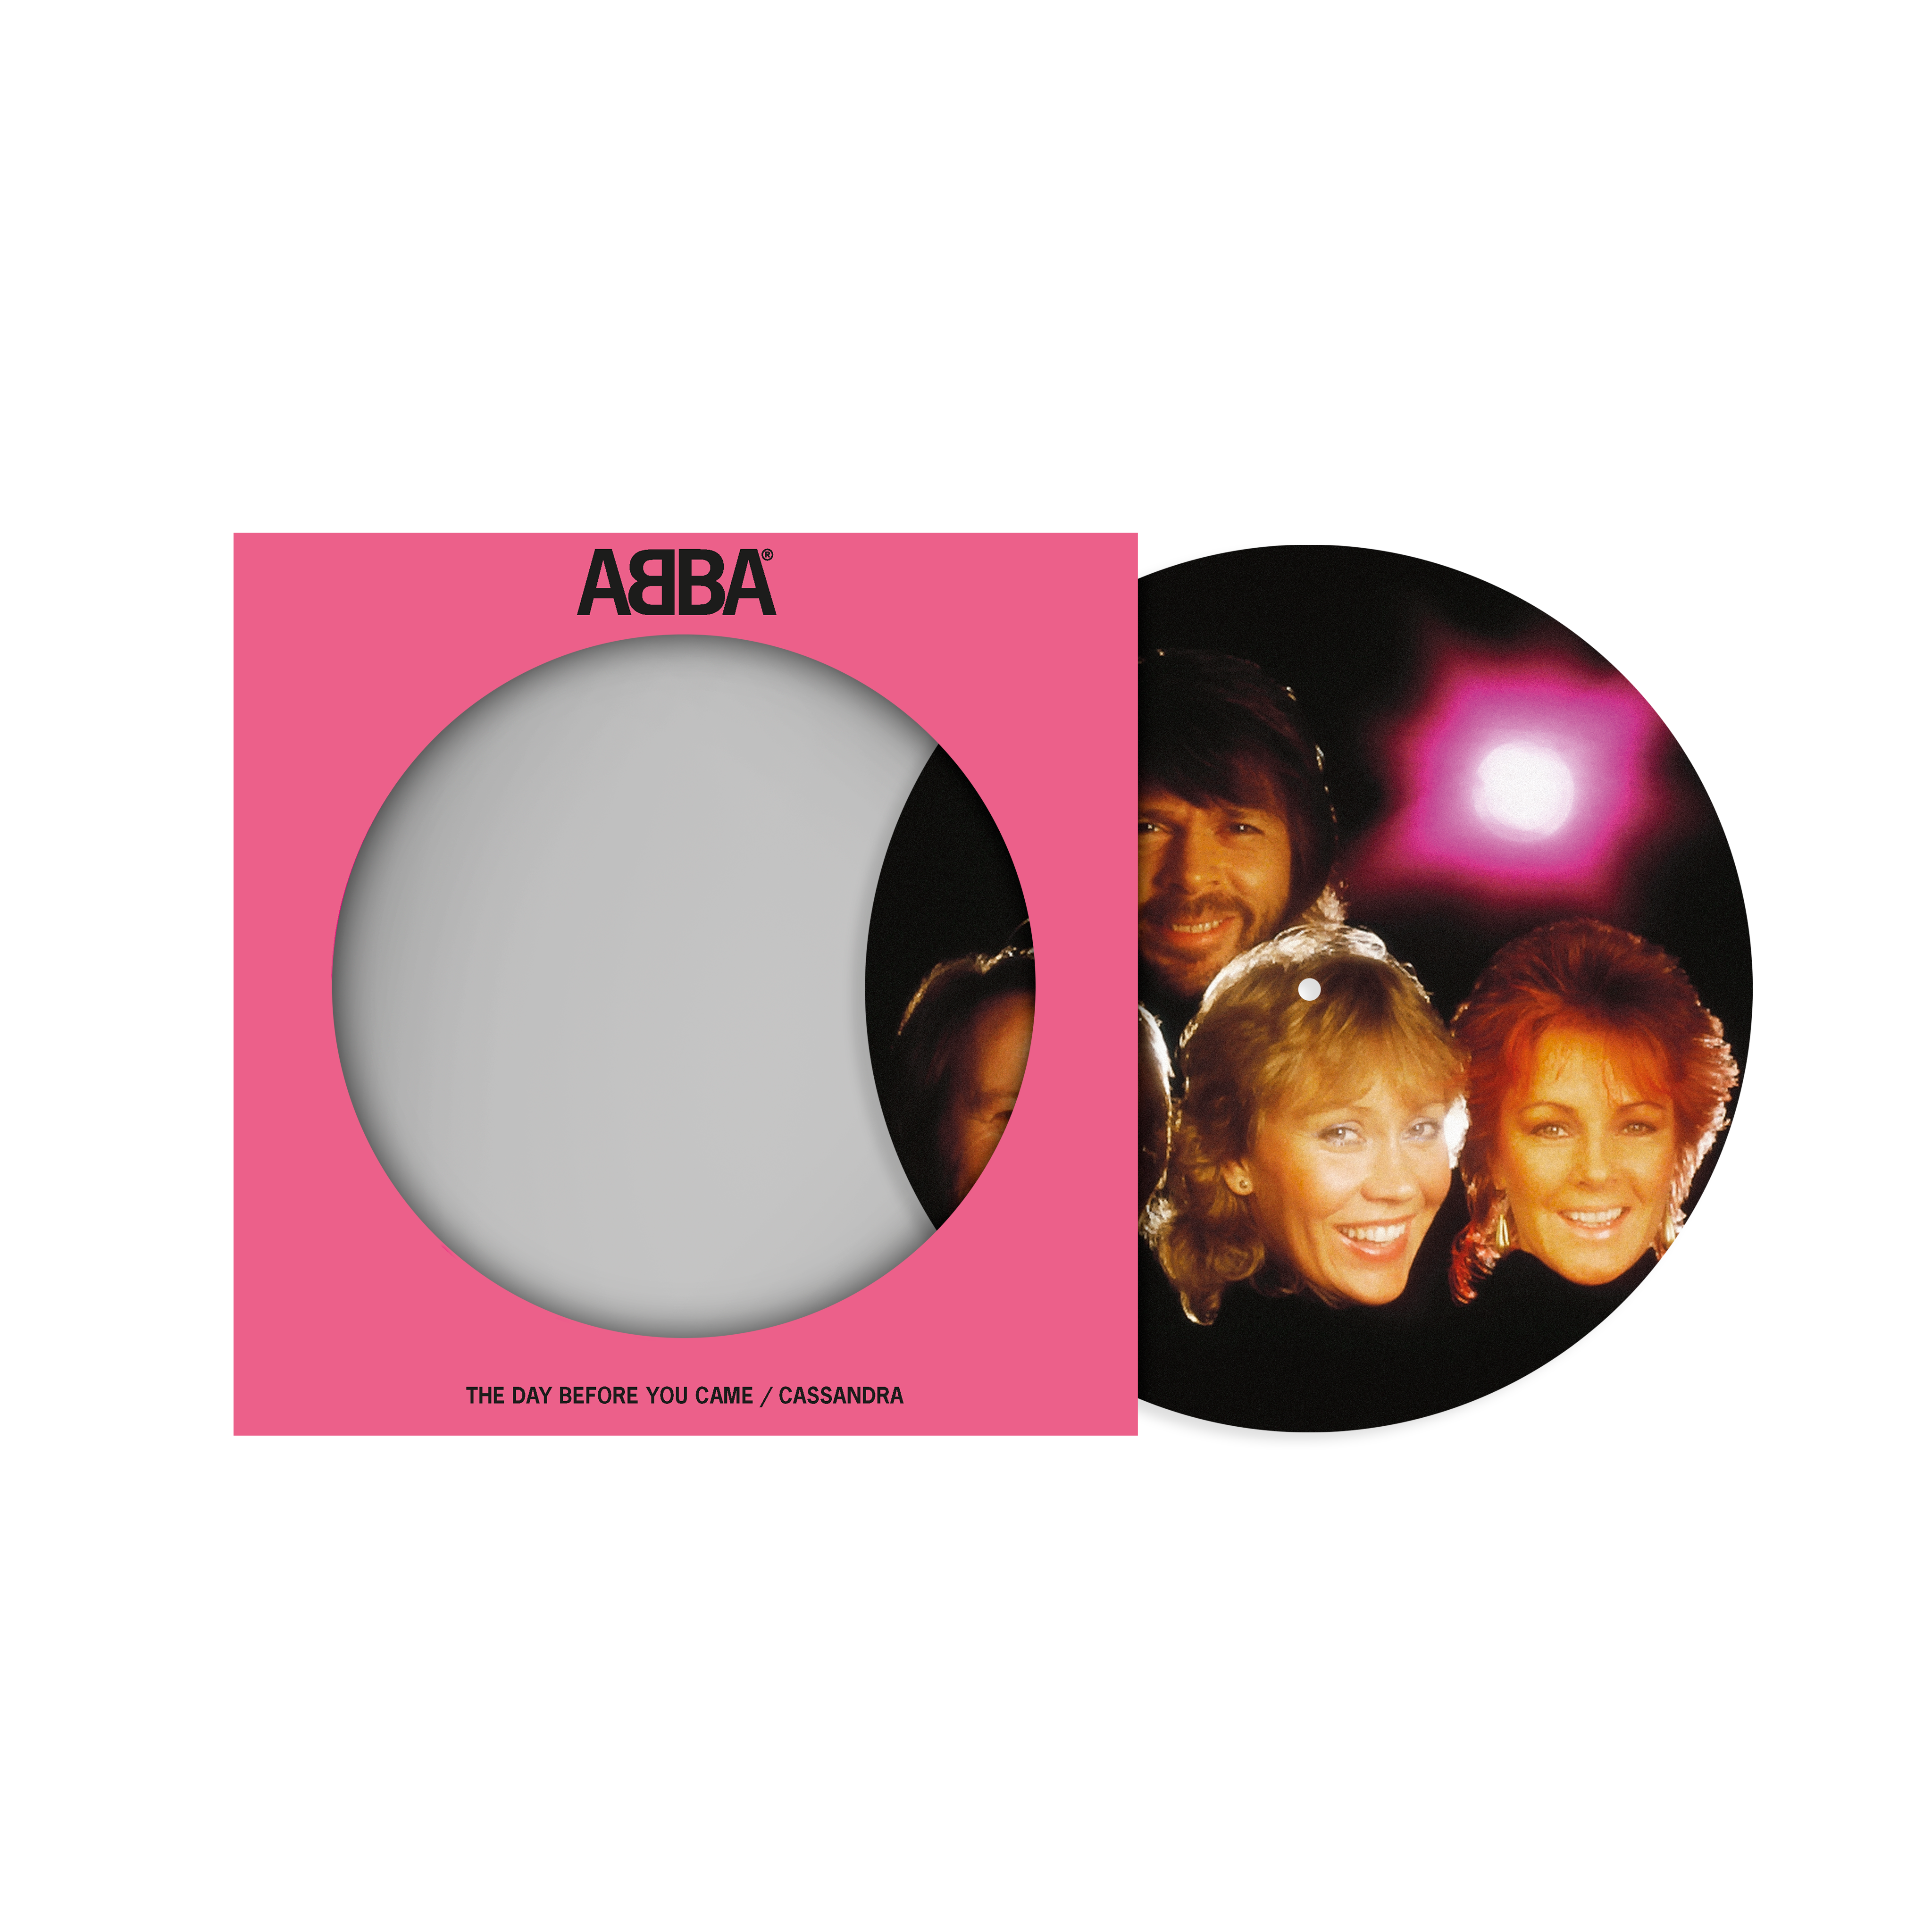 ABBA - The Day Before You Came: Picture Disc Vinyl 7" Single